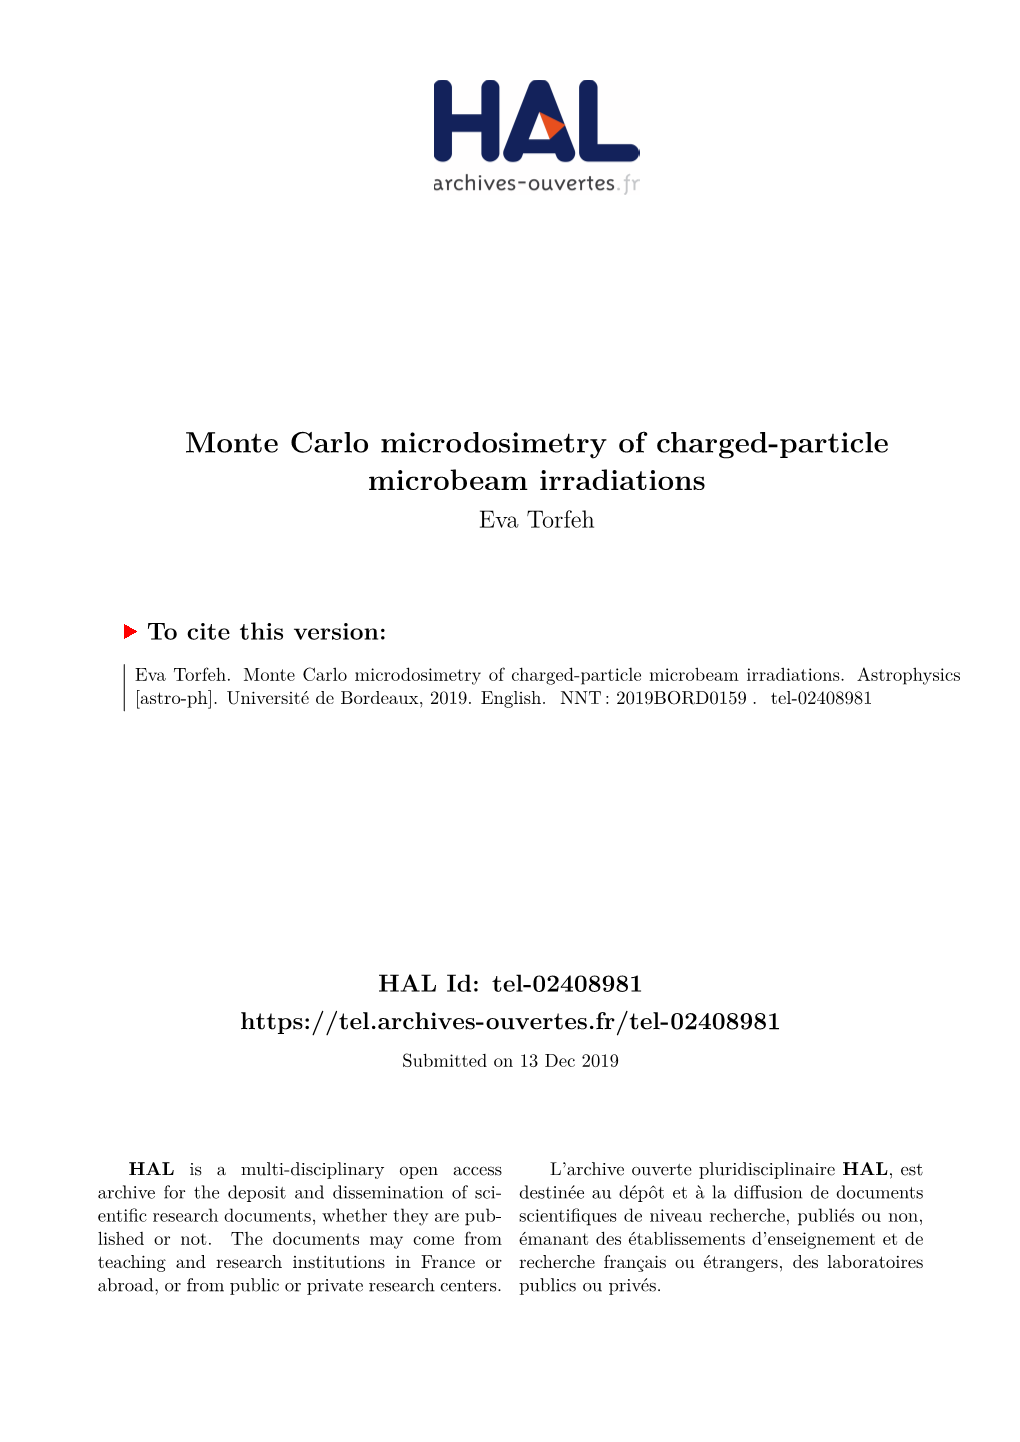 Monte Carlo Microdosimetry of Charged-Particle Microbeam Irradiations Eva Torfeh